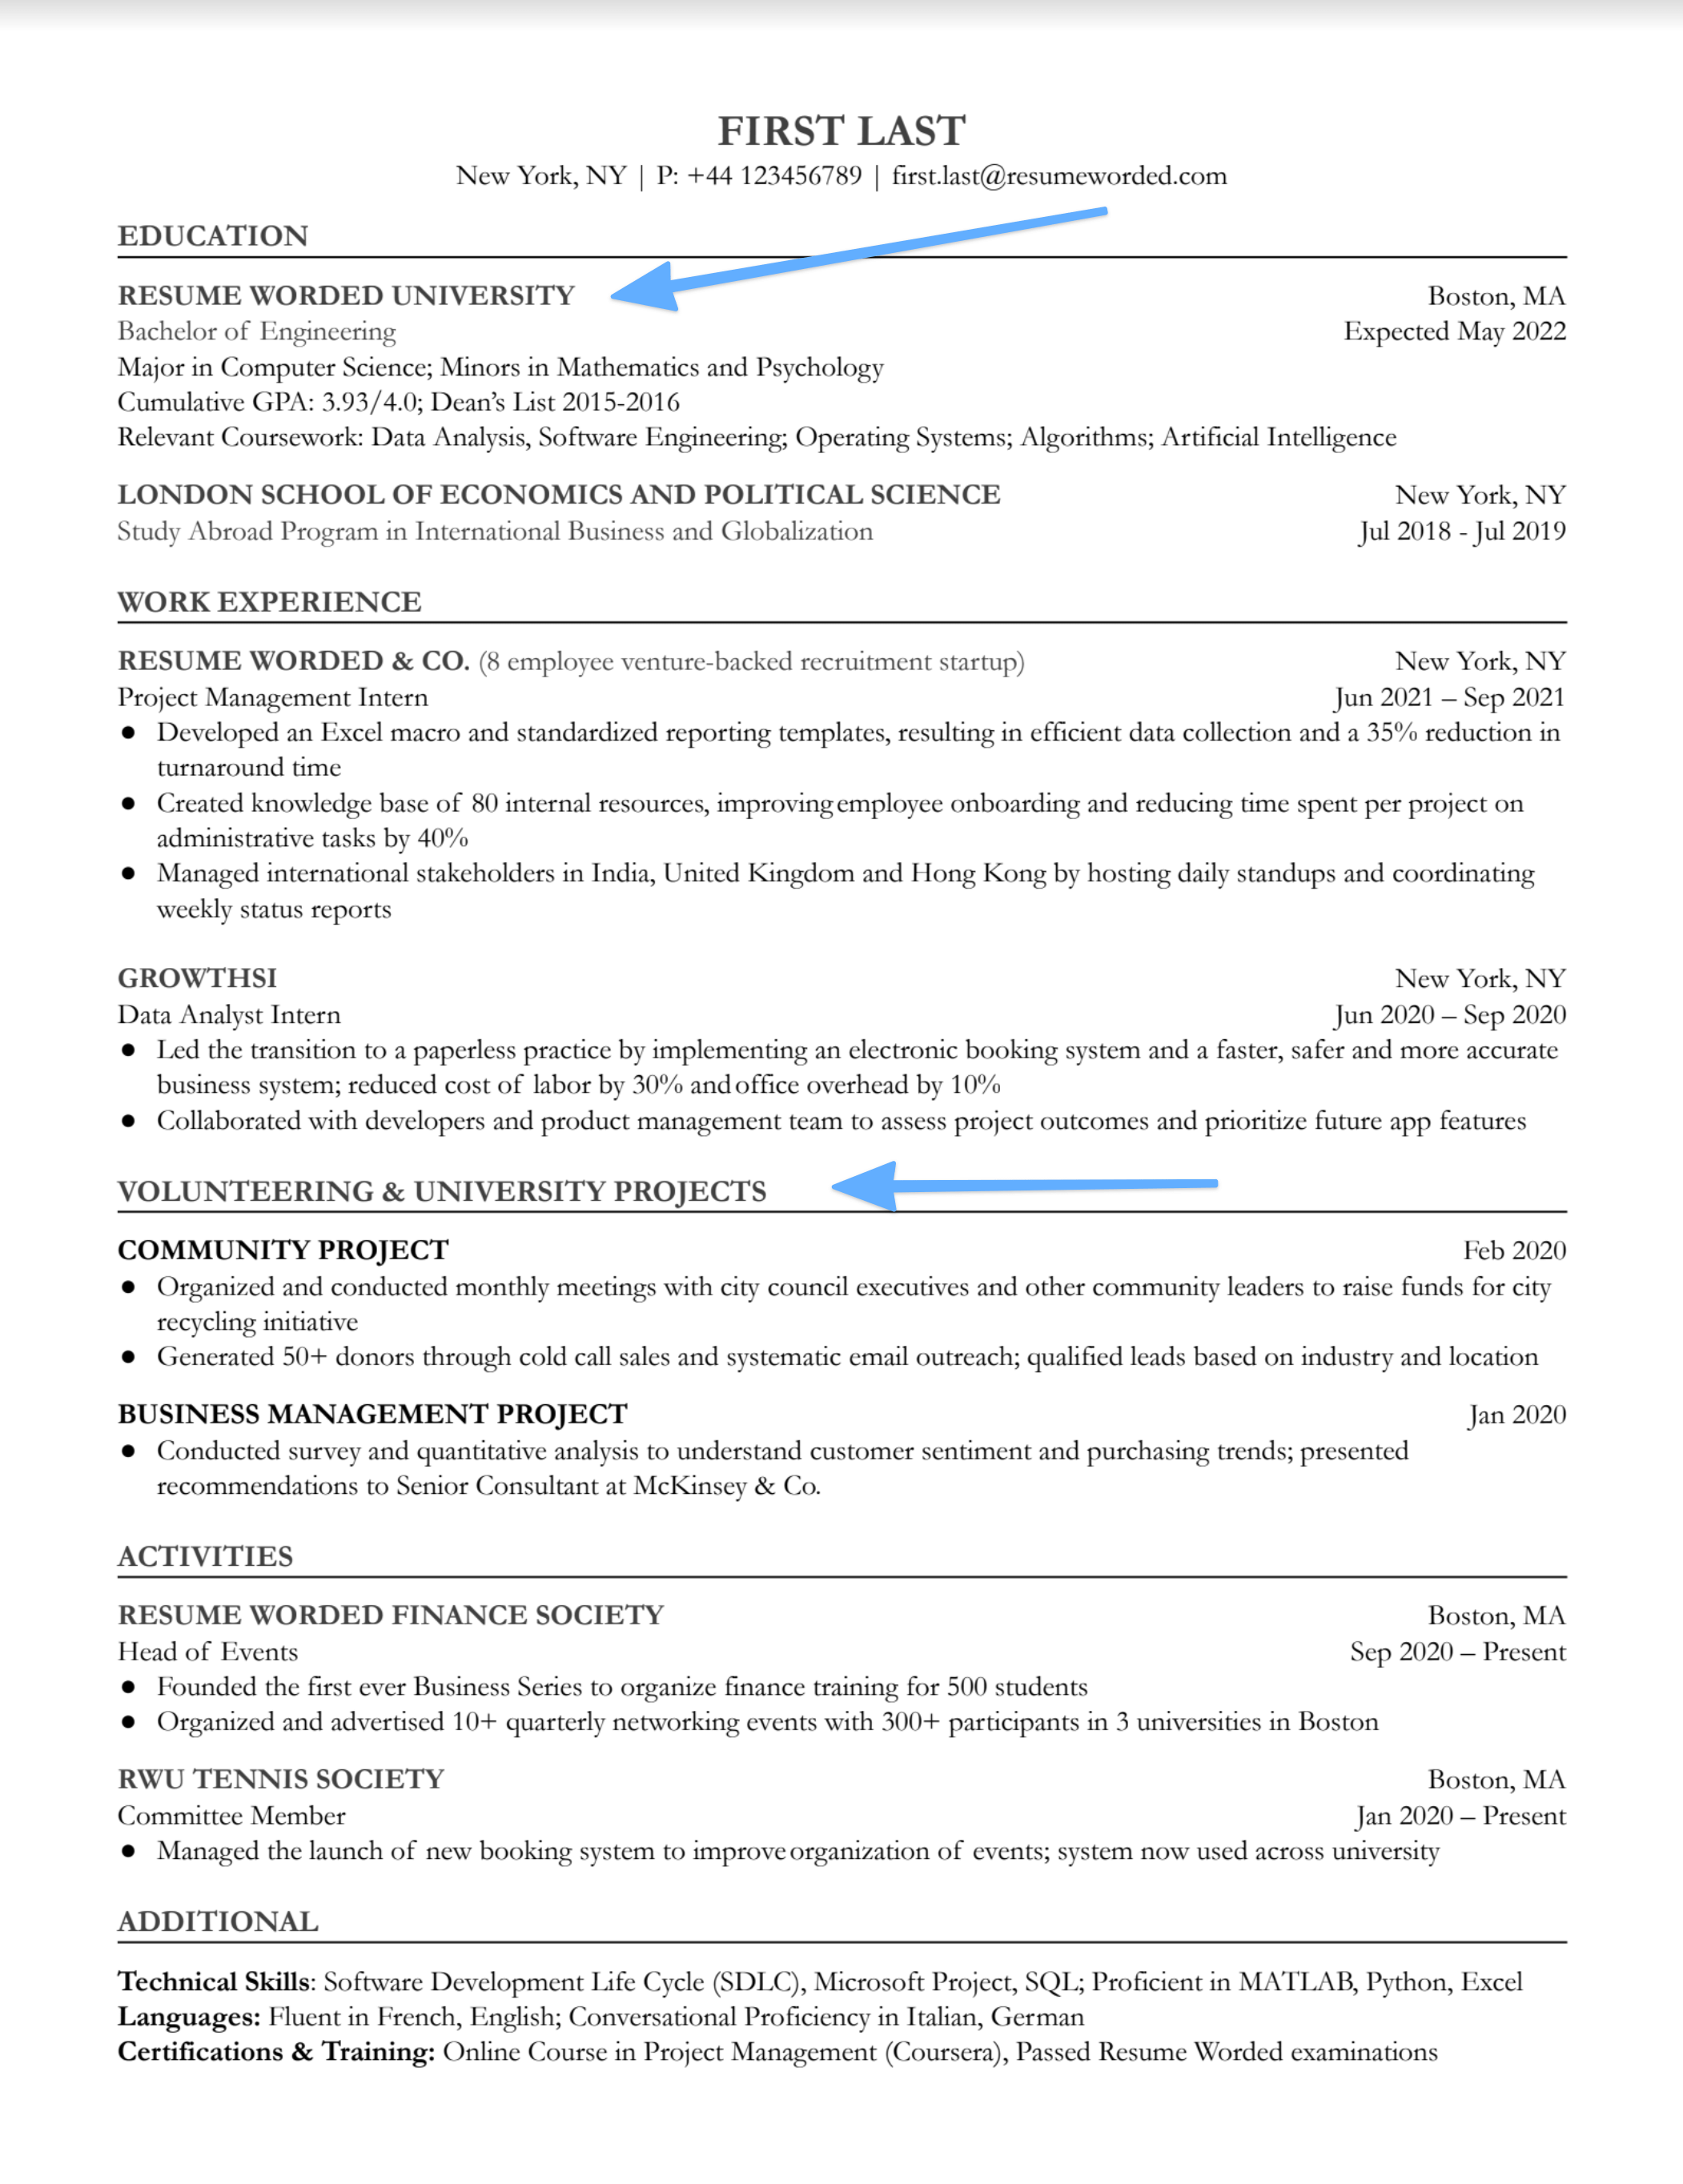 Resume screenshot highlighting project management skills and relevant certifications for an entry-level role.